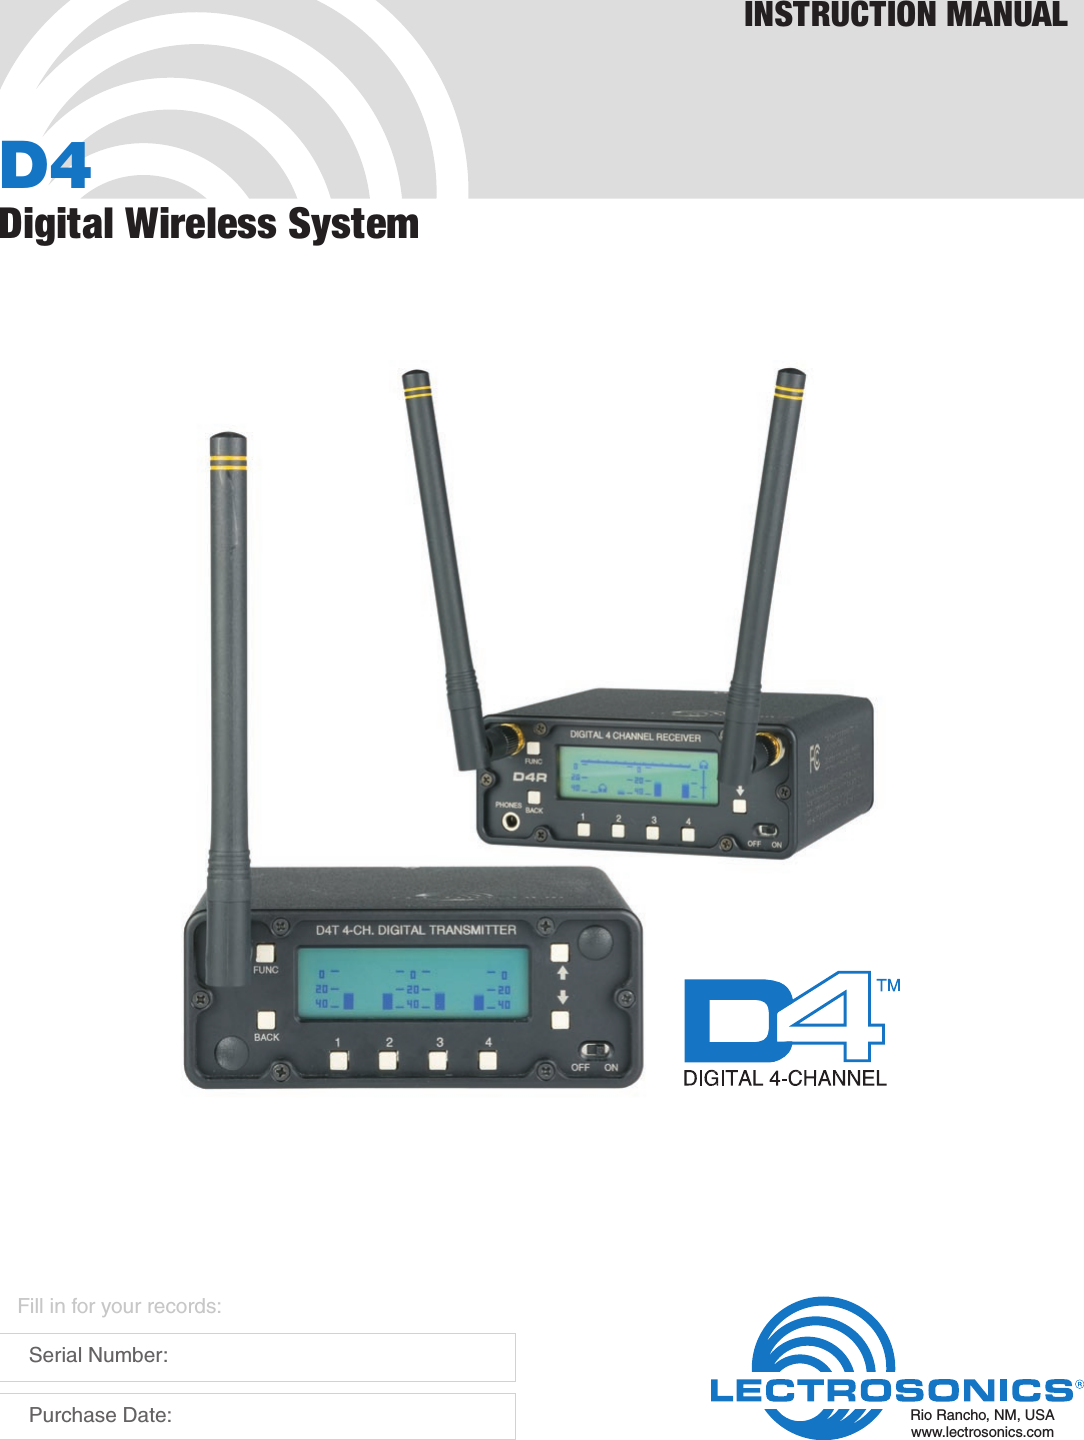 D4Digital Wireless SystemINSTRUCTION MANUALRio Rancho, NM, USAwww.lectrosonics.comFill in for your records:  Serial Number:  Purchase Date: